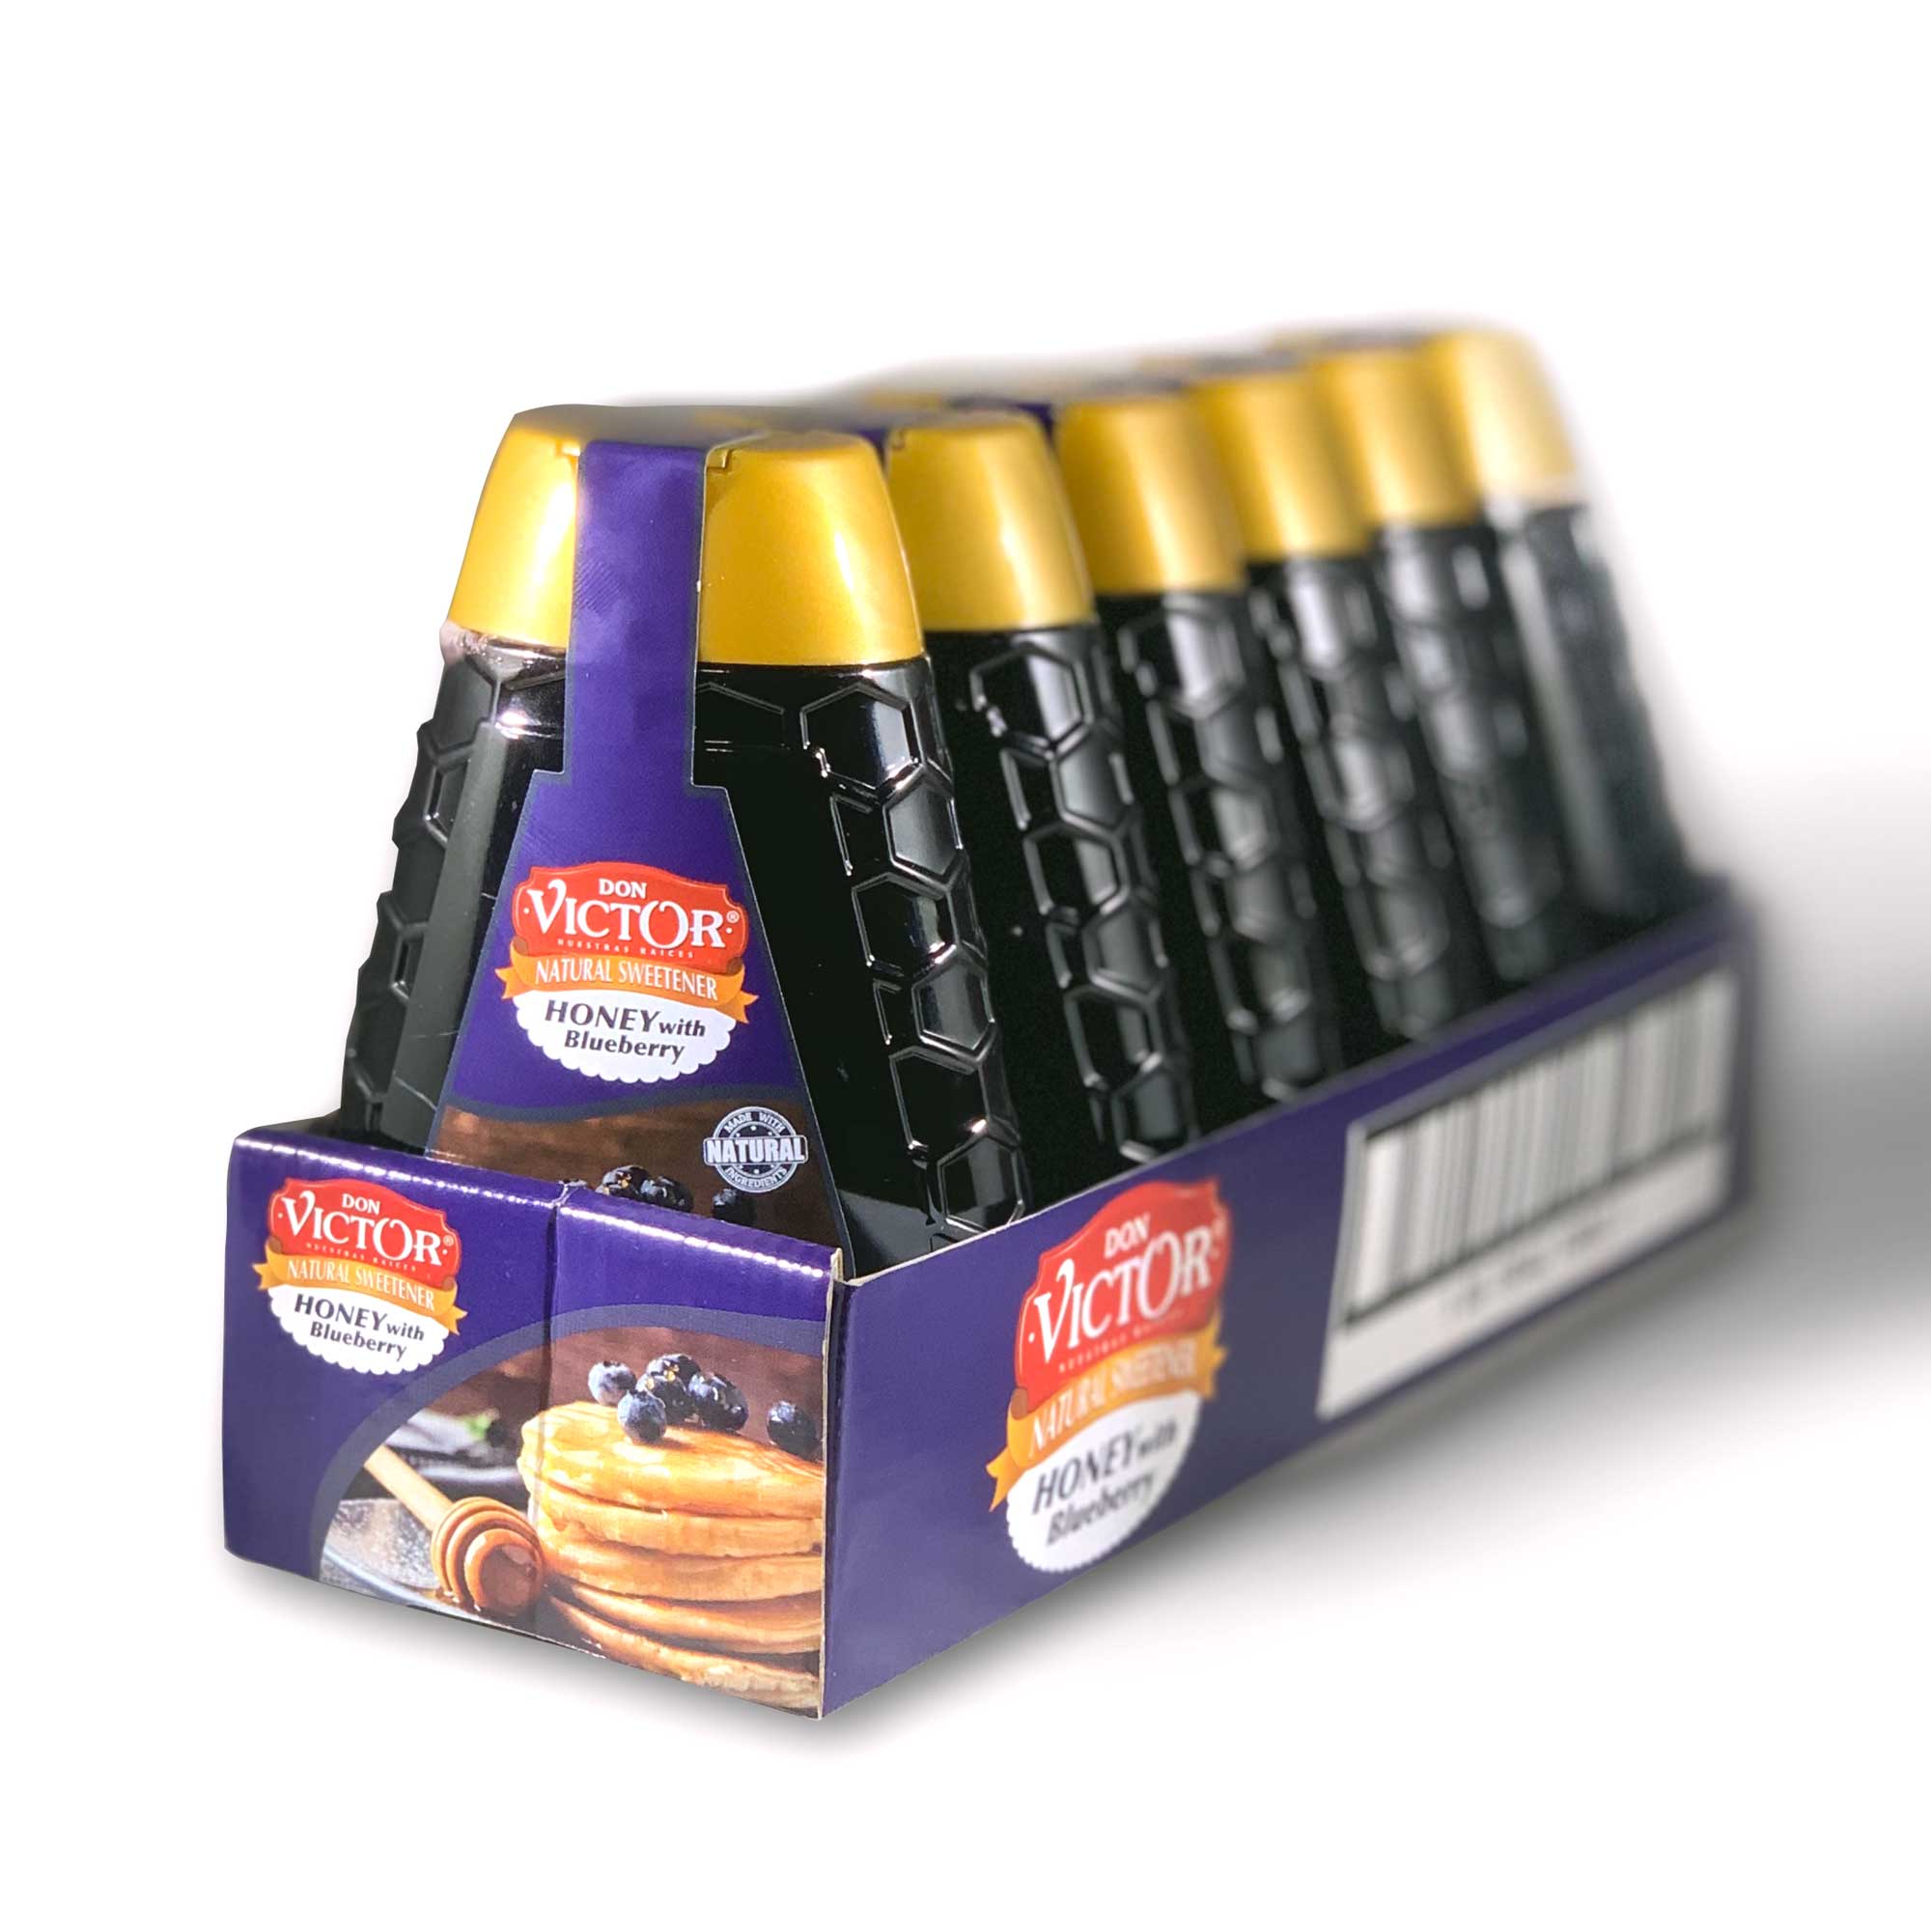 Case of Don Victor blueberry flavored honey, with 6 bottles of natural honey flavors.